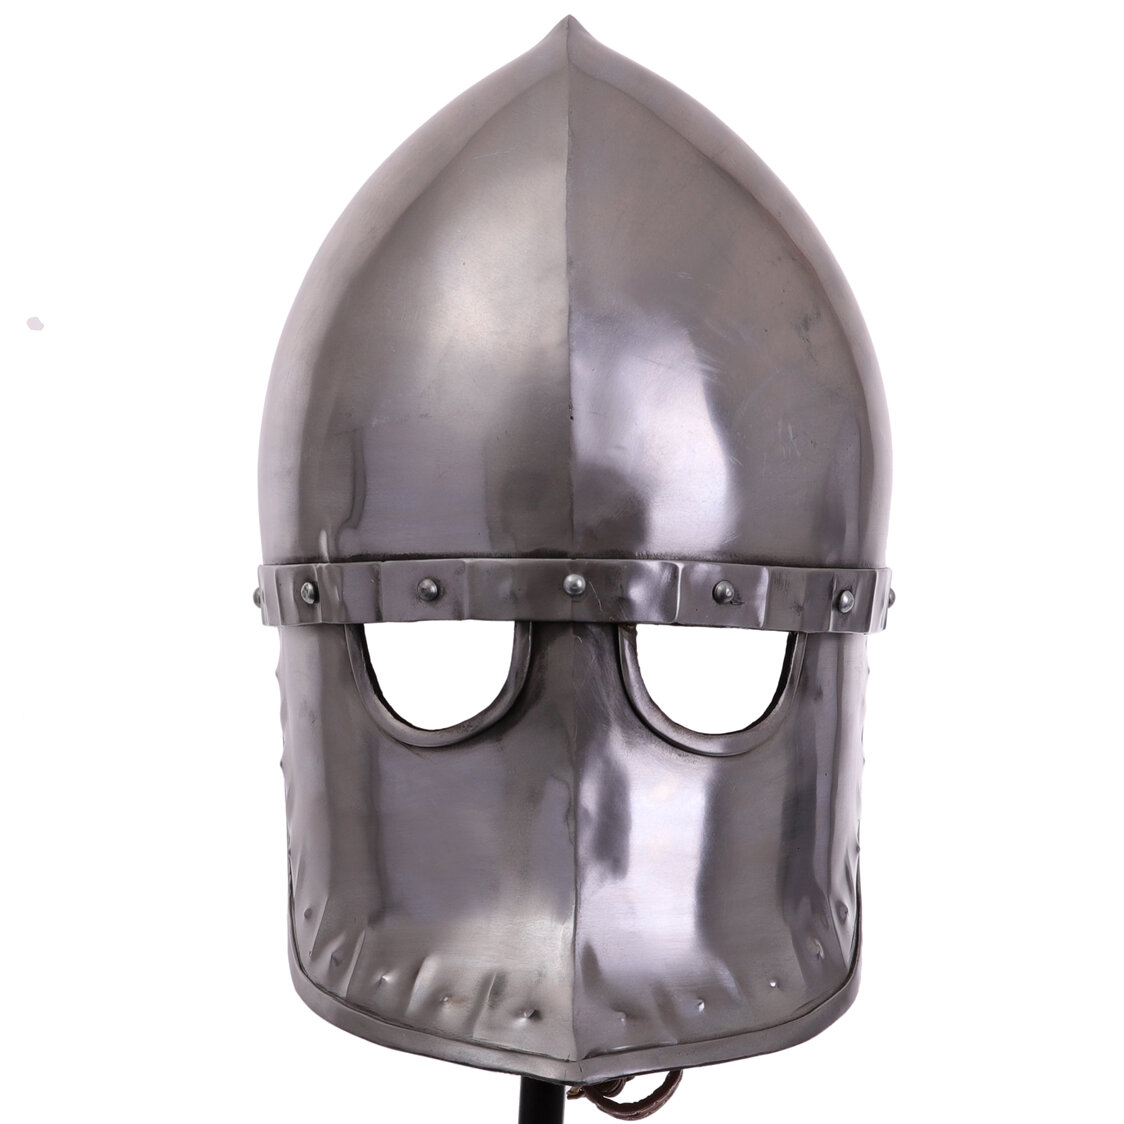 12th Century Italo-Norman Helmet with Iron Face Plate - The Red Knight